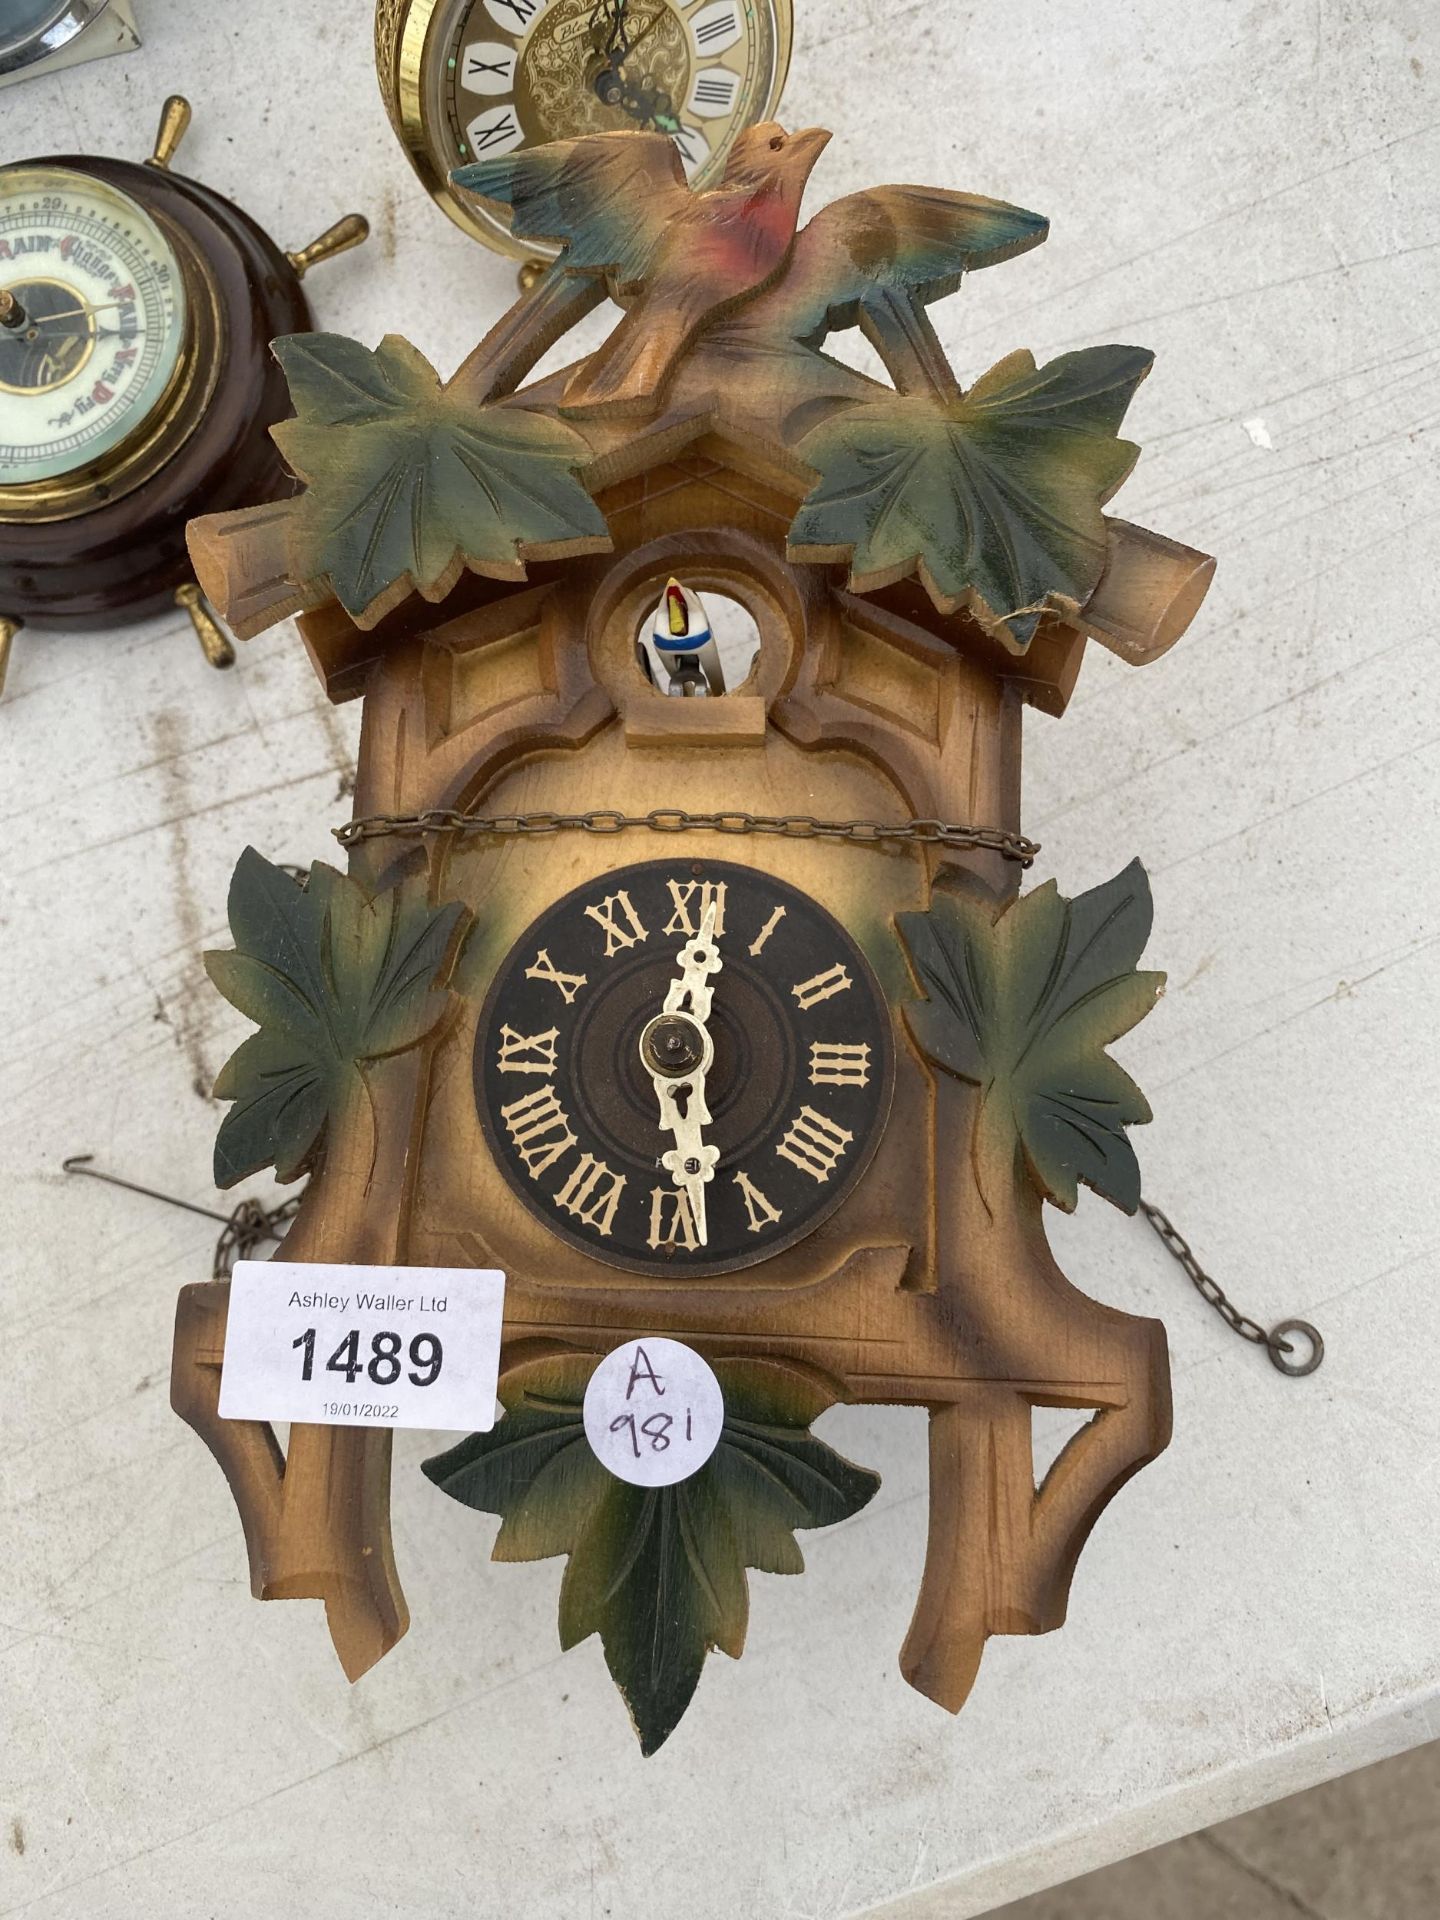 A COLLECTION OF MANTLE CLOCKS TO INCLUDE A BEROMETER IN THE STYLE OF A SHIPS WHEEL - Image 2 of 4